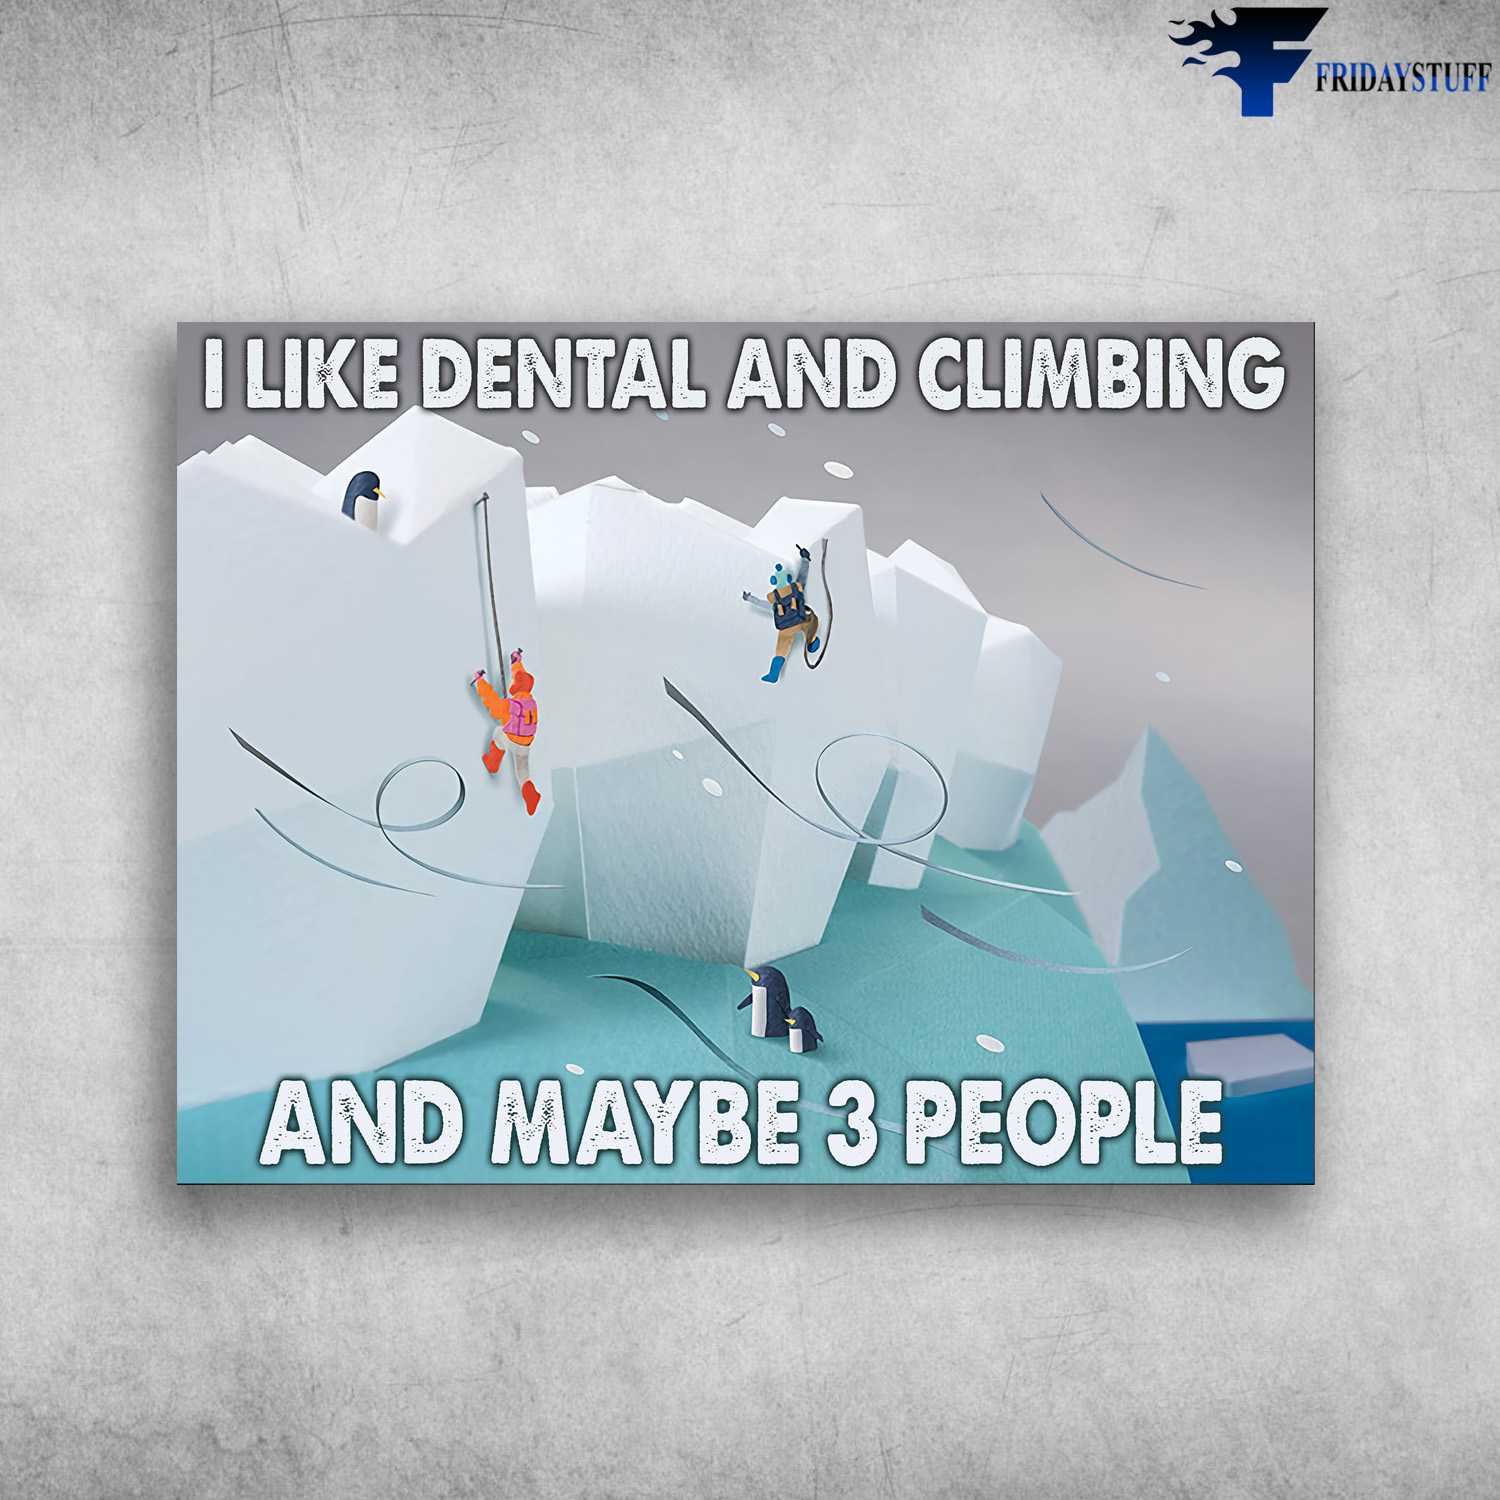 Dentist Poster, Climbing Poster, I Like Dental And Climbing, And May Be 3 People